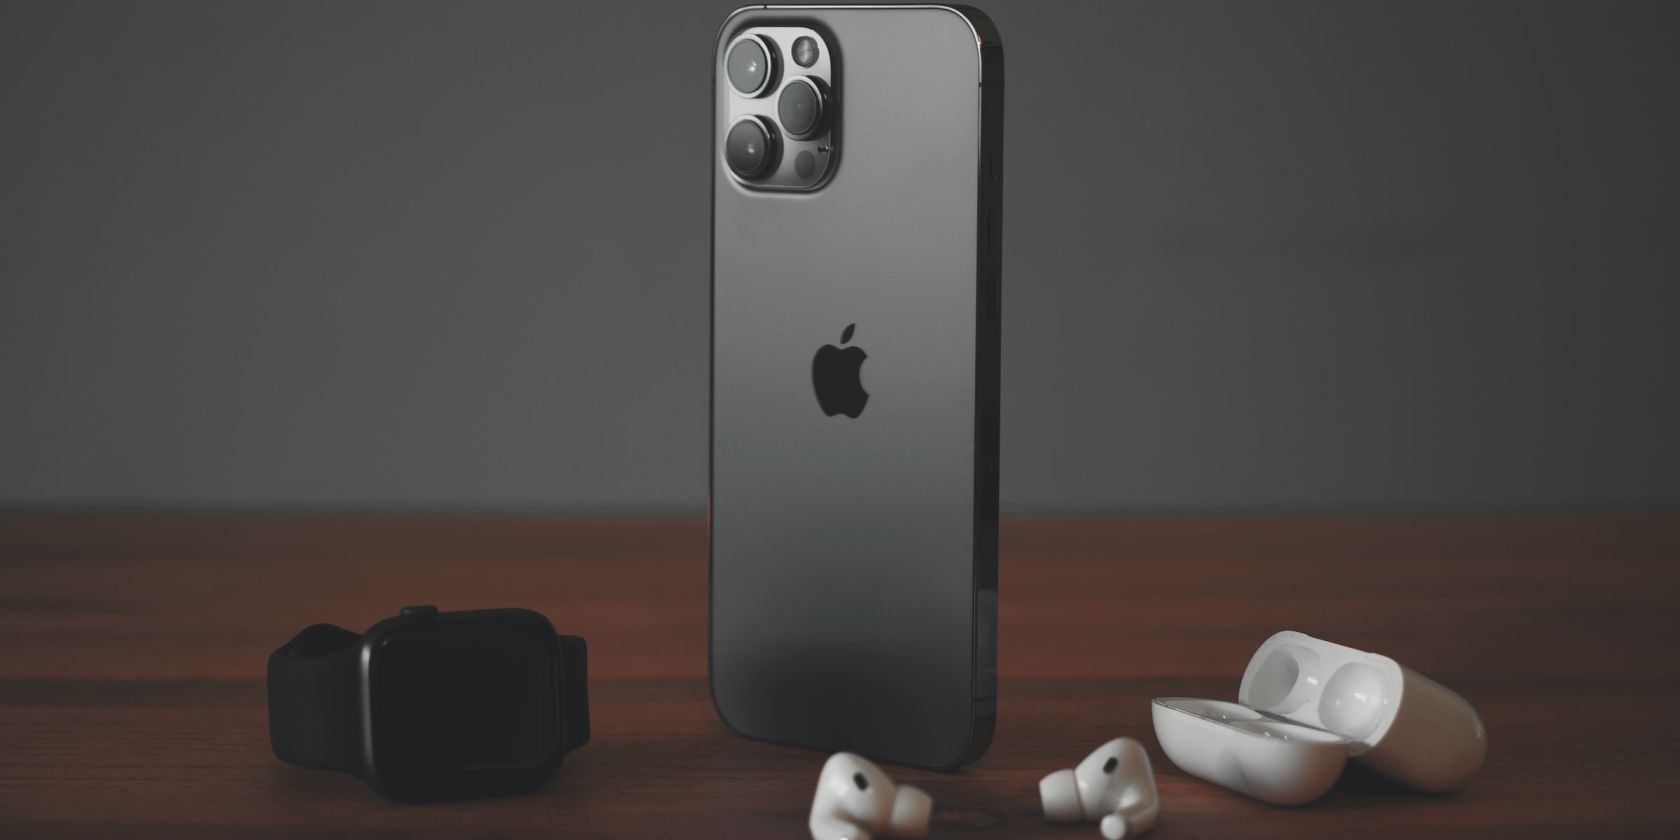 iPhone, Apple Watch, and AirPods on the table